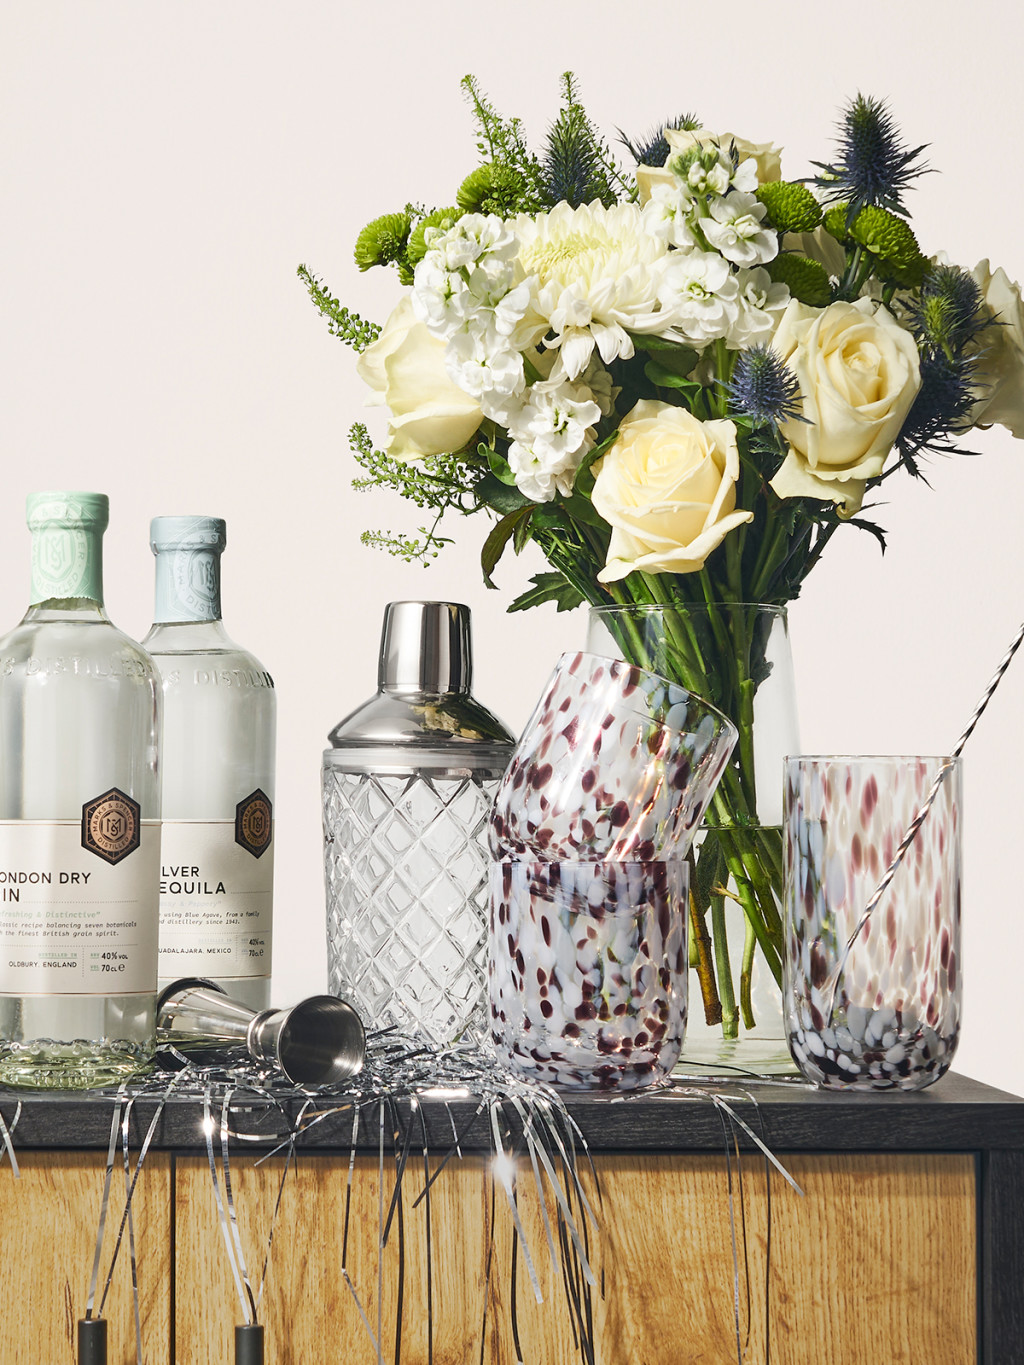 Flowers and glasses with a cocktail shaker. Explore wedding gift ideas